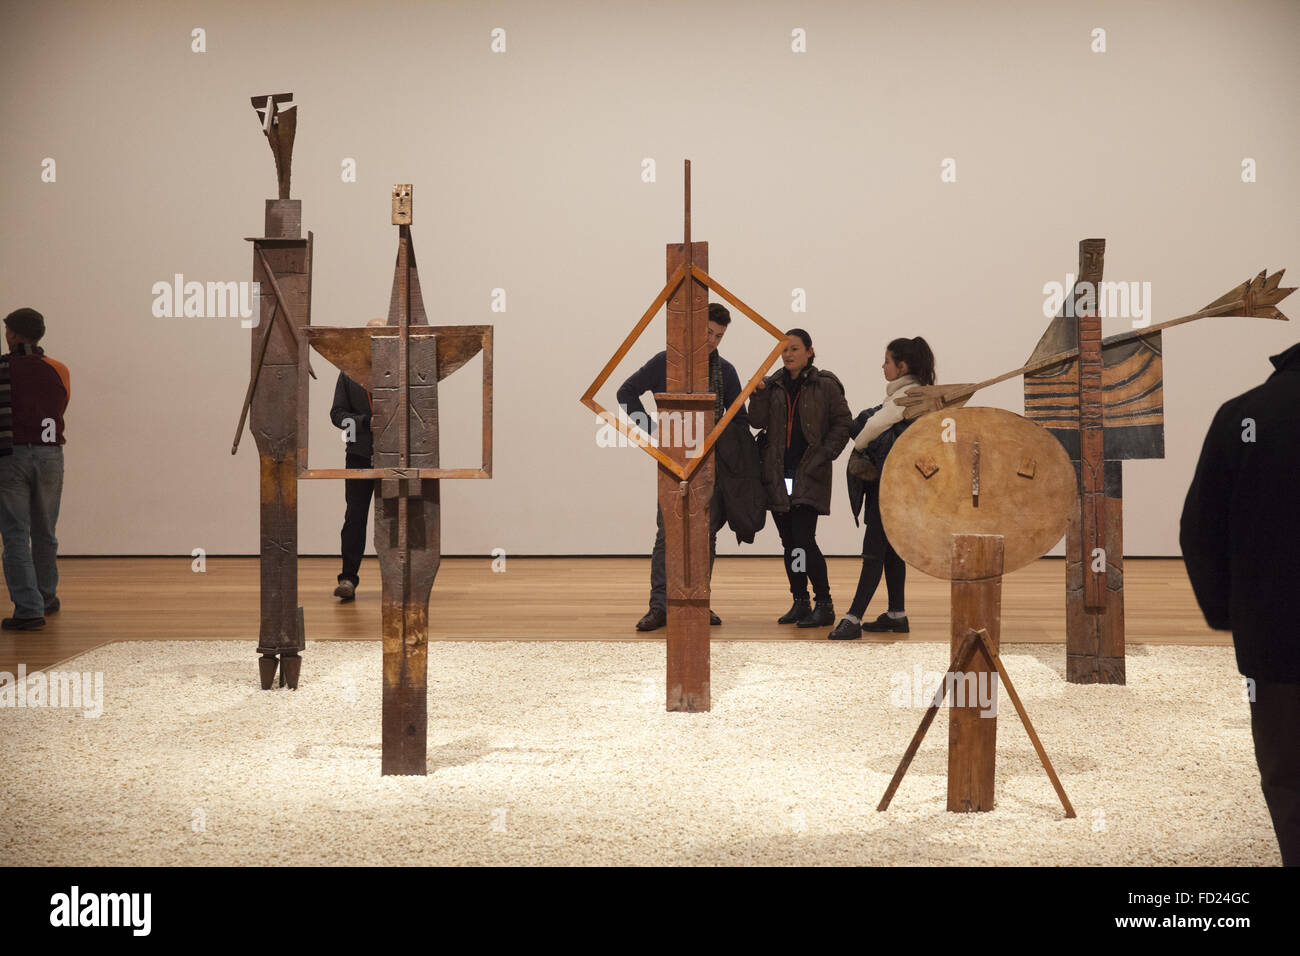 The Picasso Sculpture Exhibition at the Museum Of Modern Art in New York City has drawn record crowds. Stock Photo